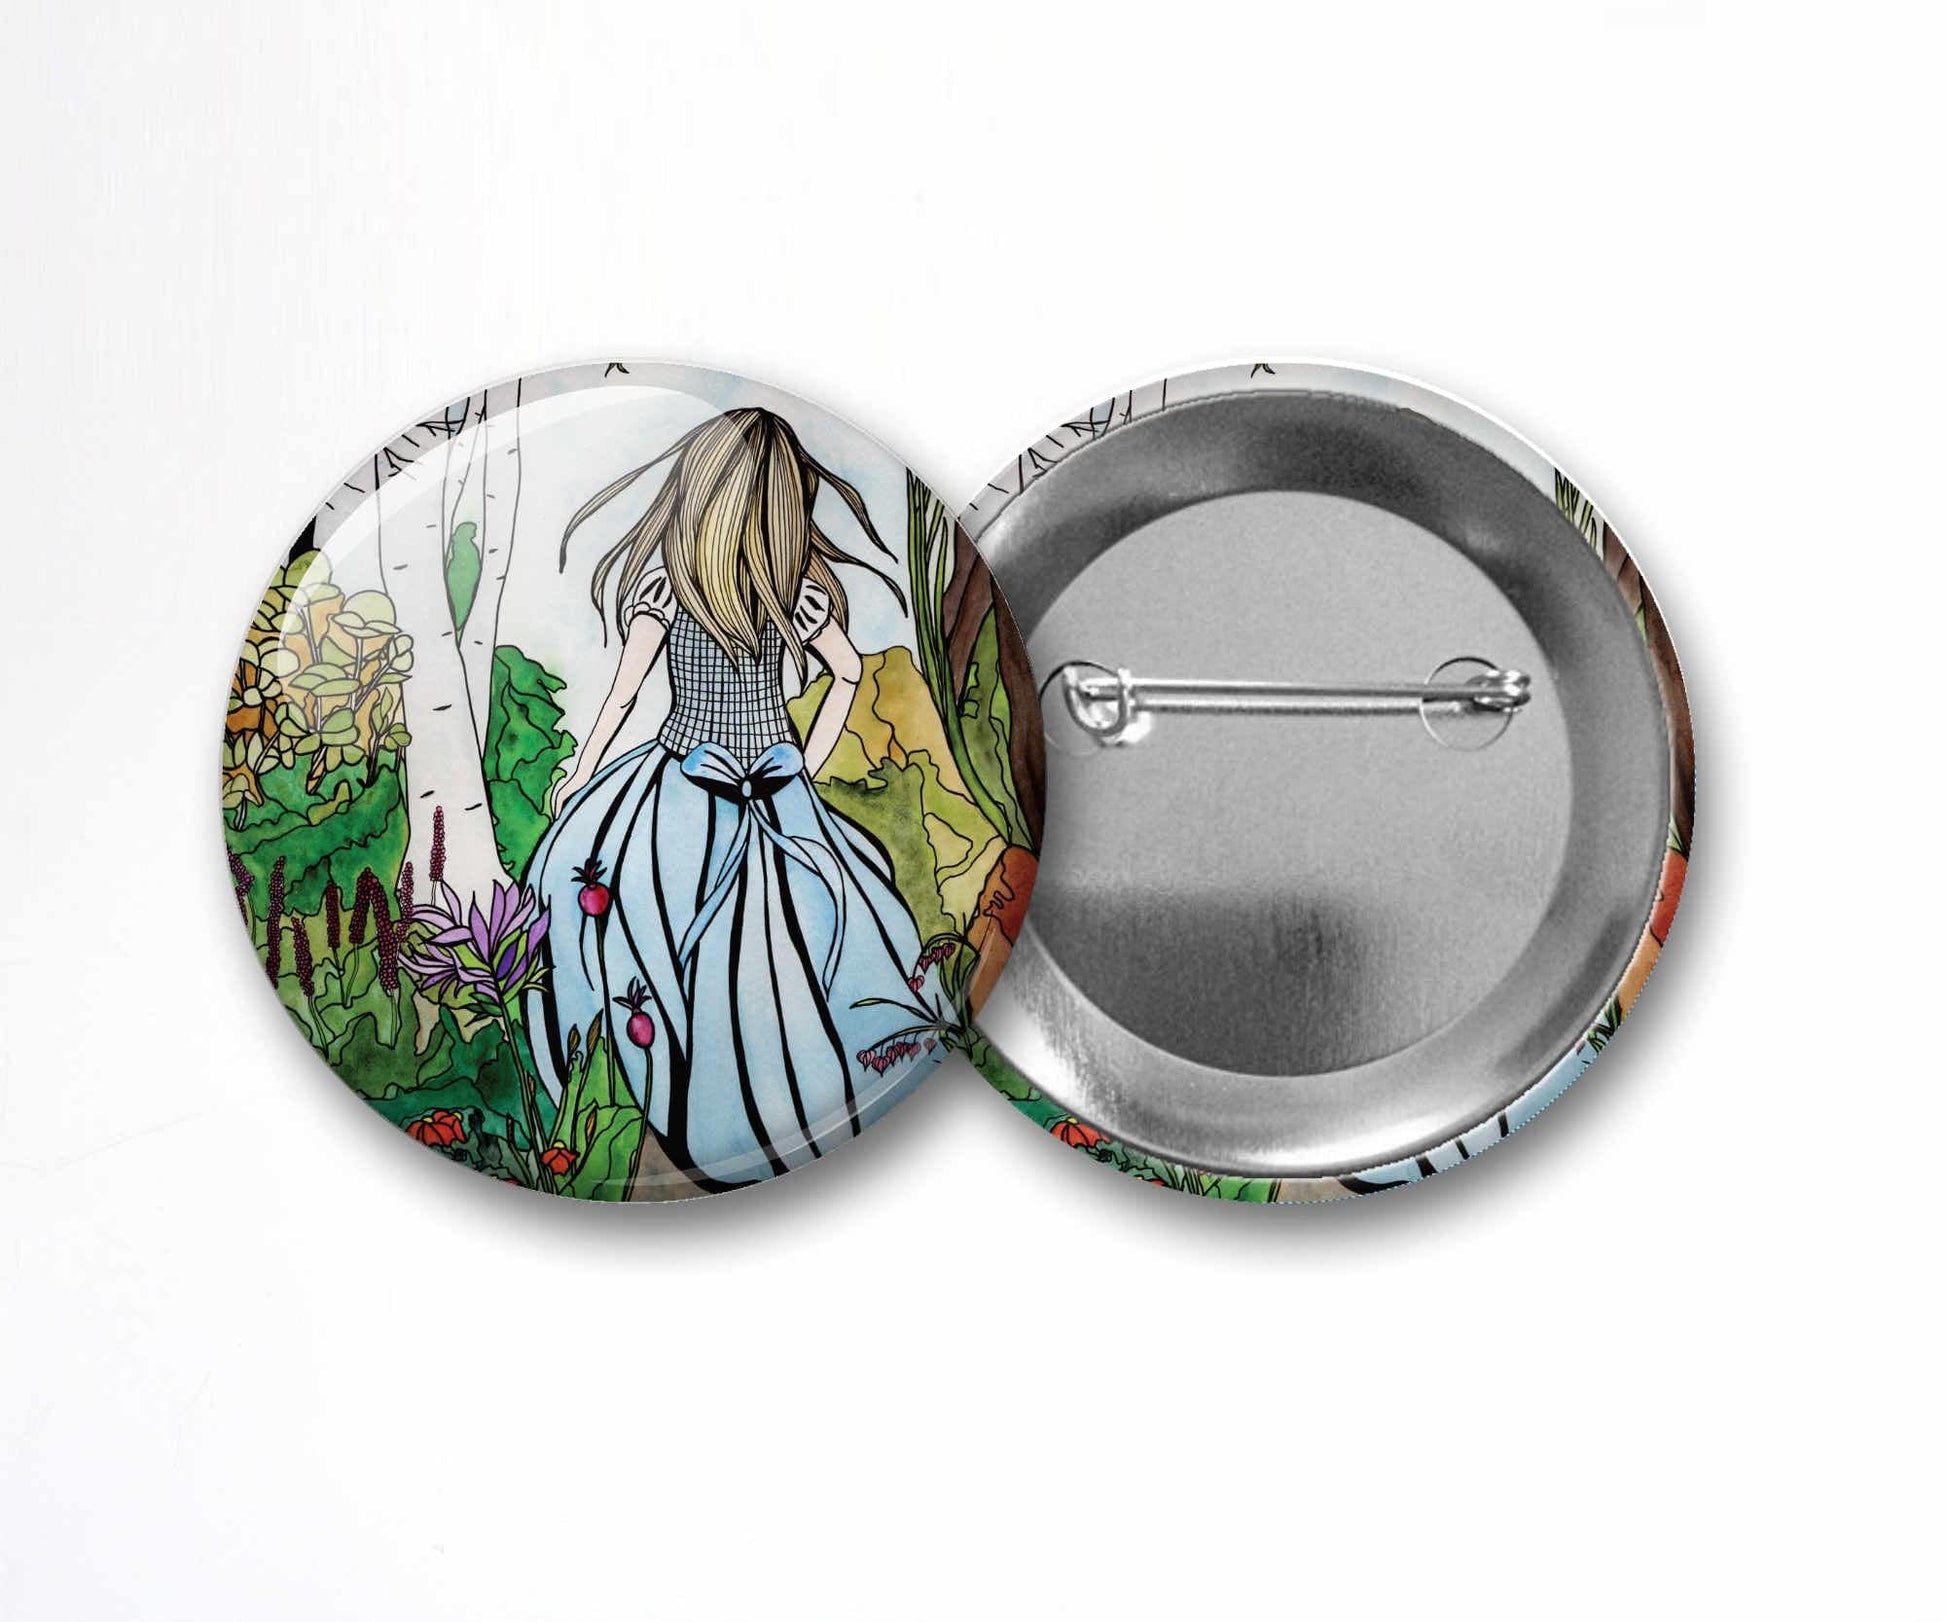 PinkPolish Design Buttons "Alice" Pin Back Button, 2.25 Inch